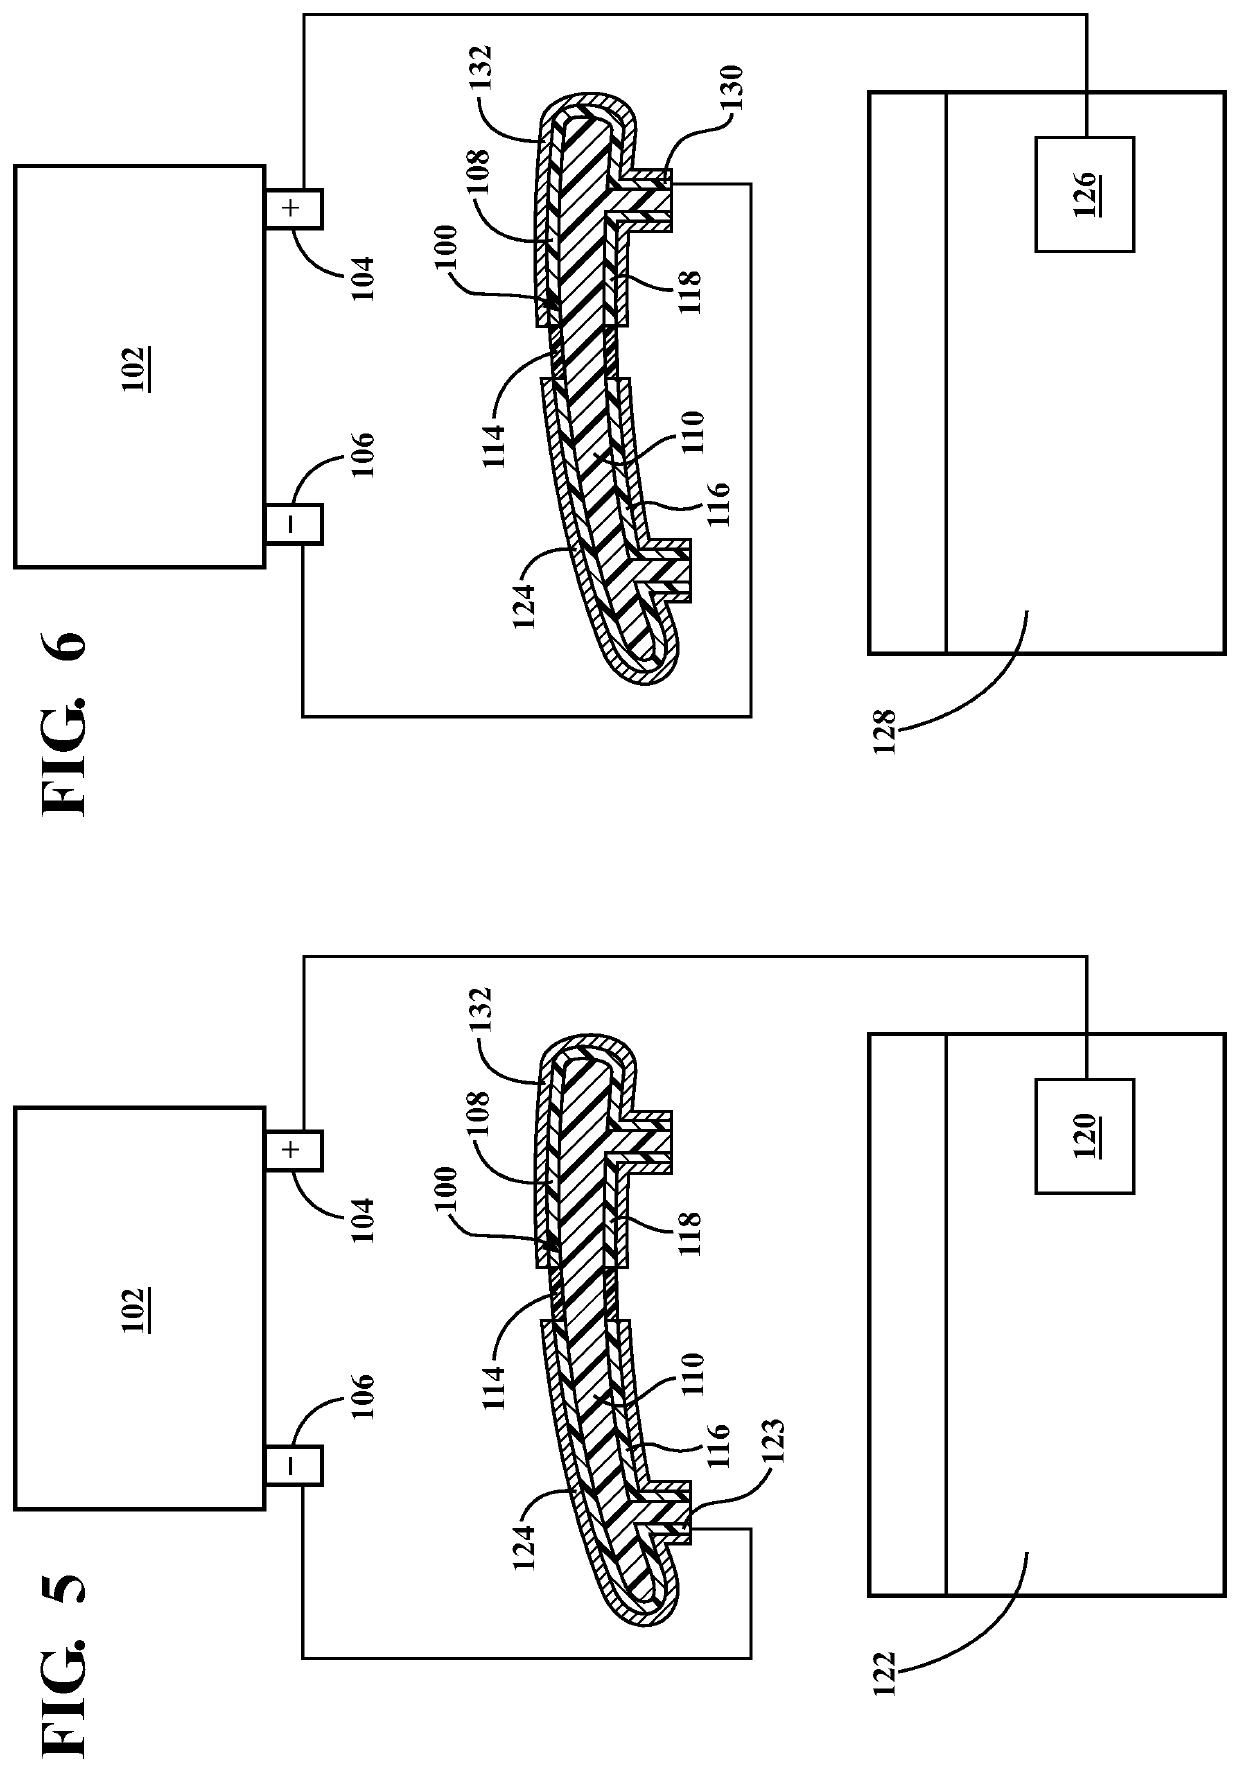 Method for creating multiple electrical current pathways on a work piece